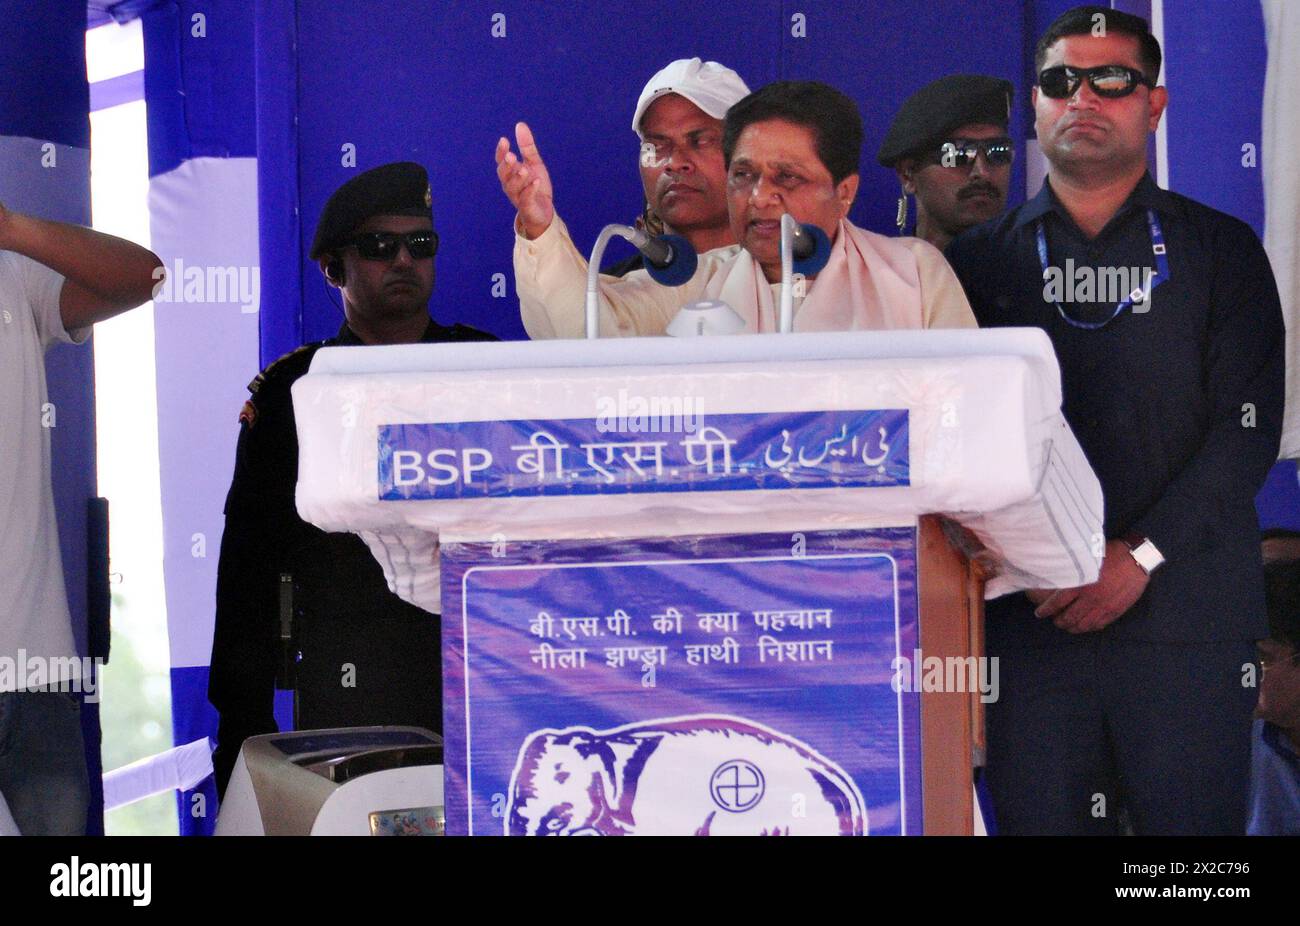 GHAZIABAD, INDIA - APRIL 21: Bahujan Samaj Party's national president Mayawati addresses an election rally at Kavi Nagar Ramlila Ground, on April 21, 2024 in Ghaziabad, India. She said that if electronic voting machines (EVMs) are not tampered with, it will be 'difficult' for the ruling BJP to win the Lok Sabha polls this time. She also hit out at the BJP, saying 'due to the casteist, capitalist and communal policies of the BJP', the party will have to face a tough fight in this parliamentary election. (Photo by Sakib Ali/Hindustan Times/Sipa USA ) Credit: Sipa USA/Alamy Live News Stock Photo